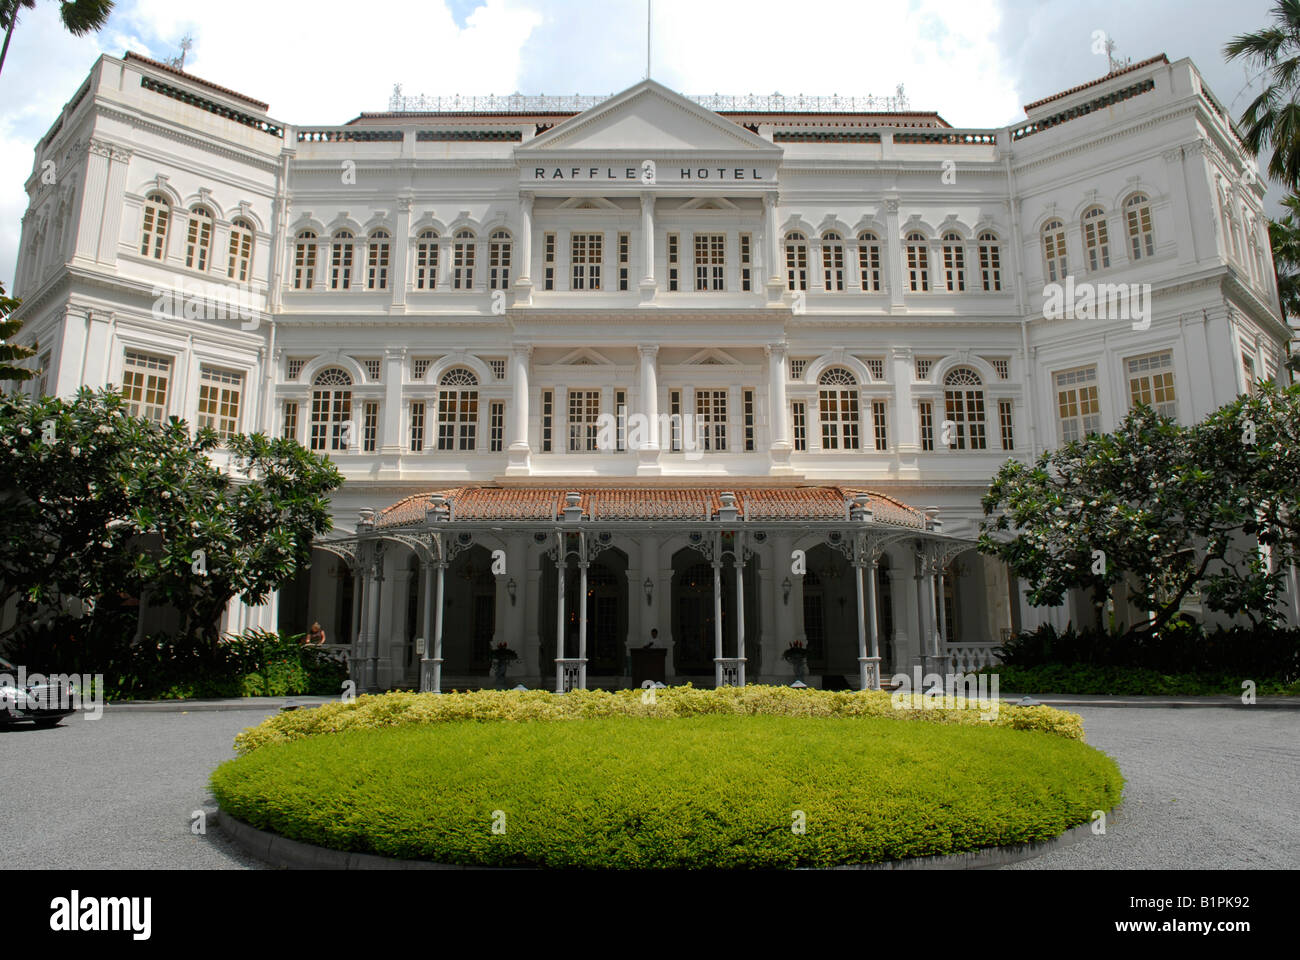 Raffles hotel in Singapore, l'hotel Raffles a Singapour. Stock Photo